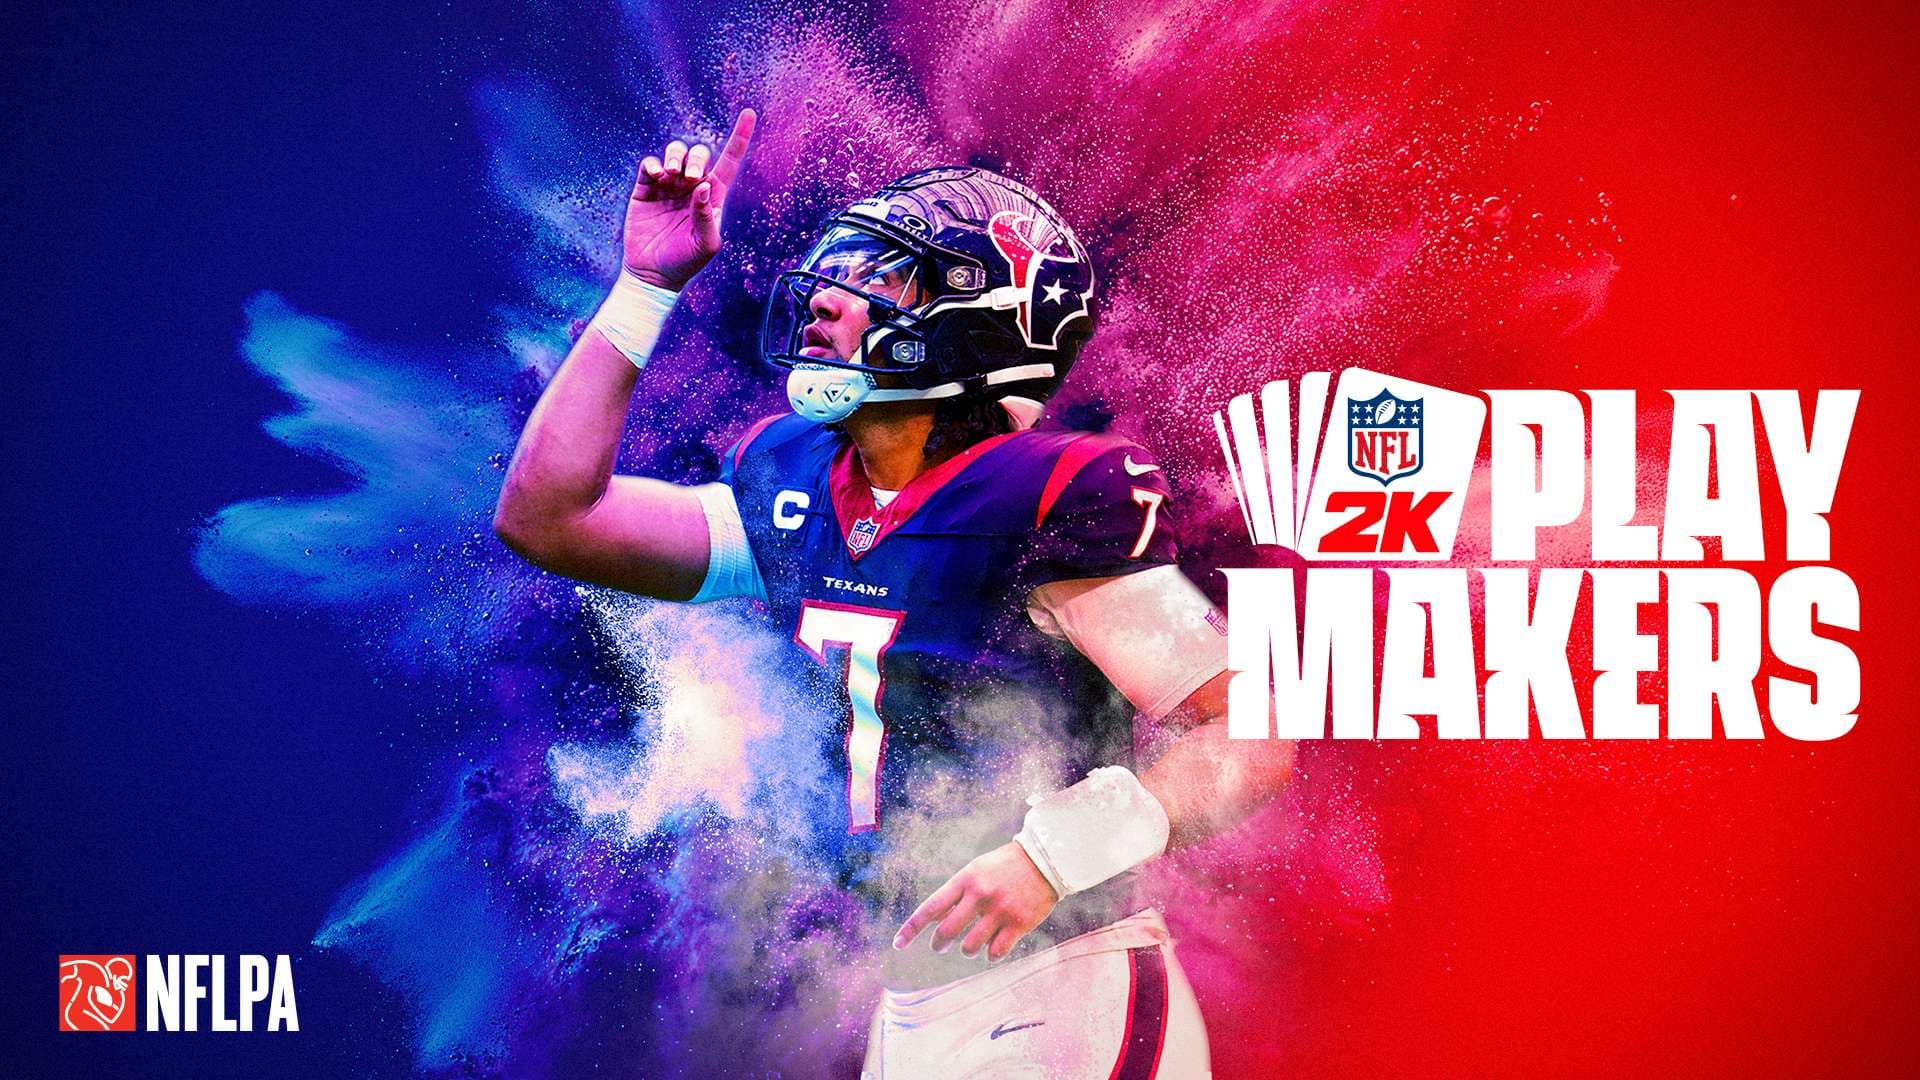 You are currently viewing NFL, NFLPA AND 2K ANNOUNCE LAUNCH OF NFL 2K PLAYMAKERS MOBILE GAME